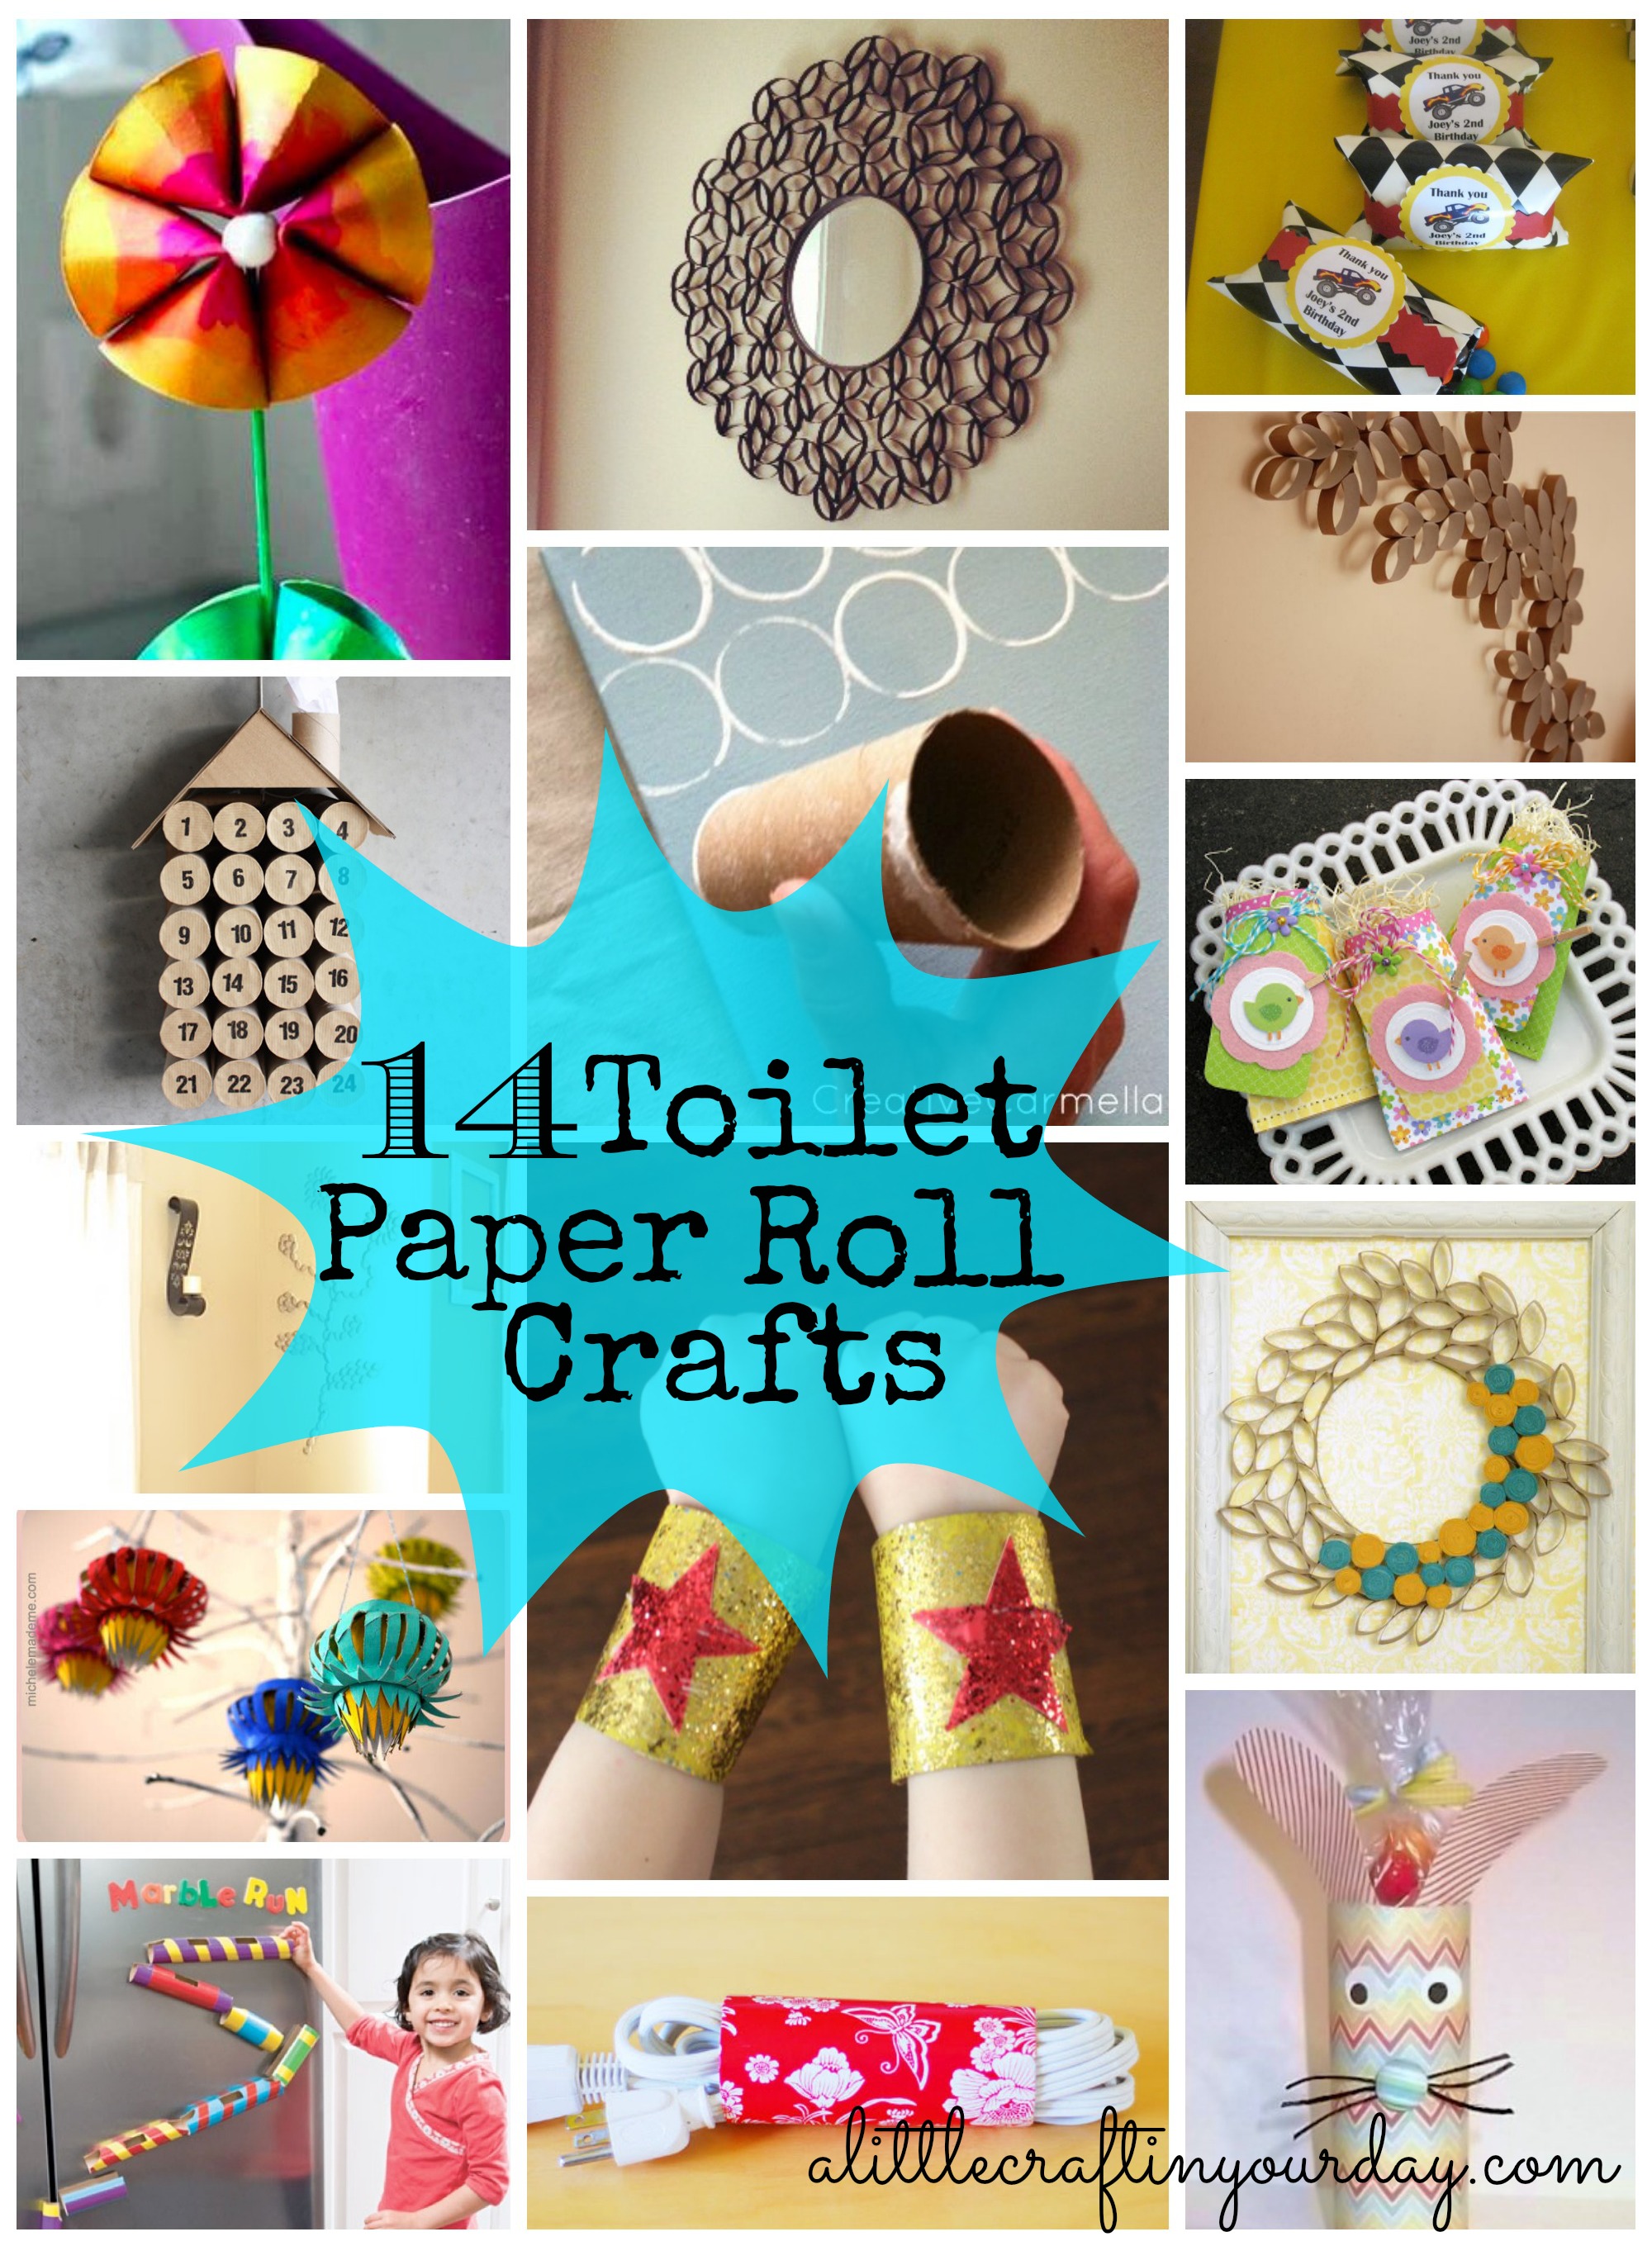 14_Toilet_Paper_Roll_Crafts